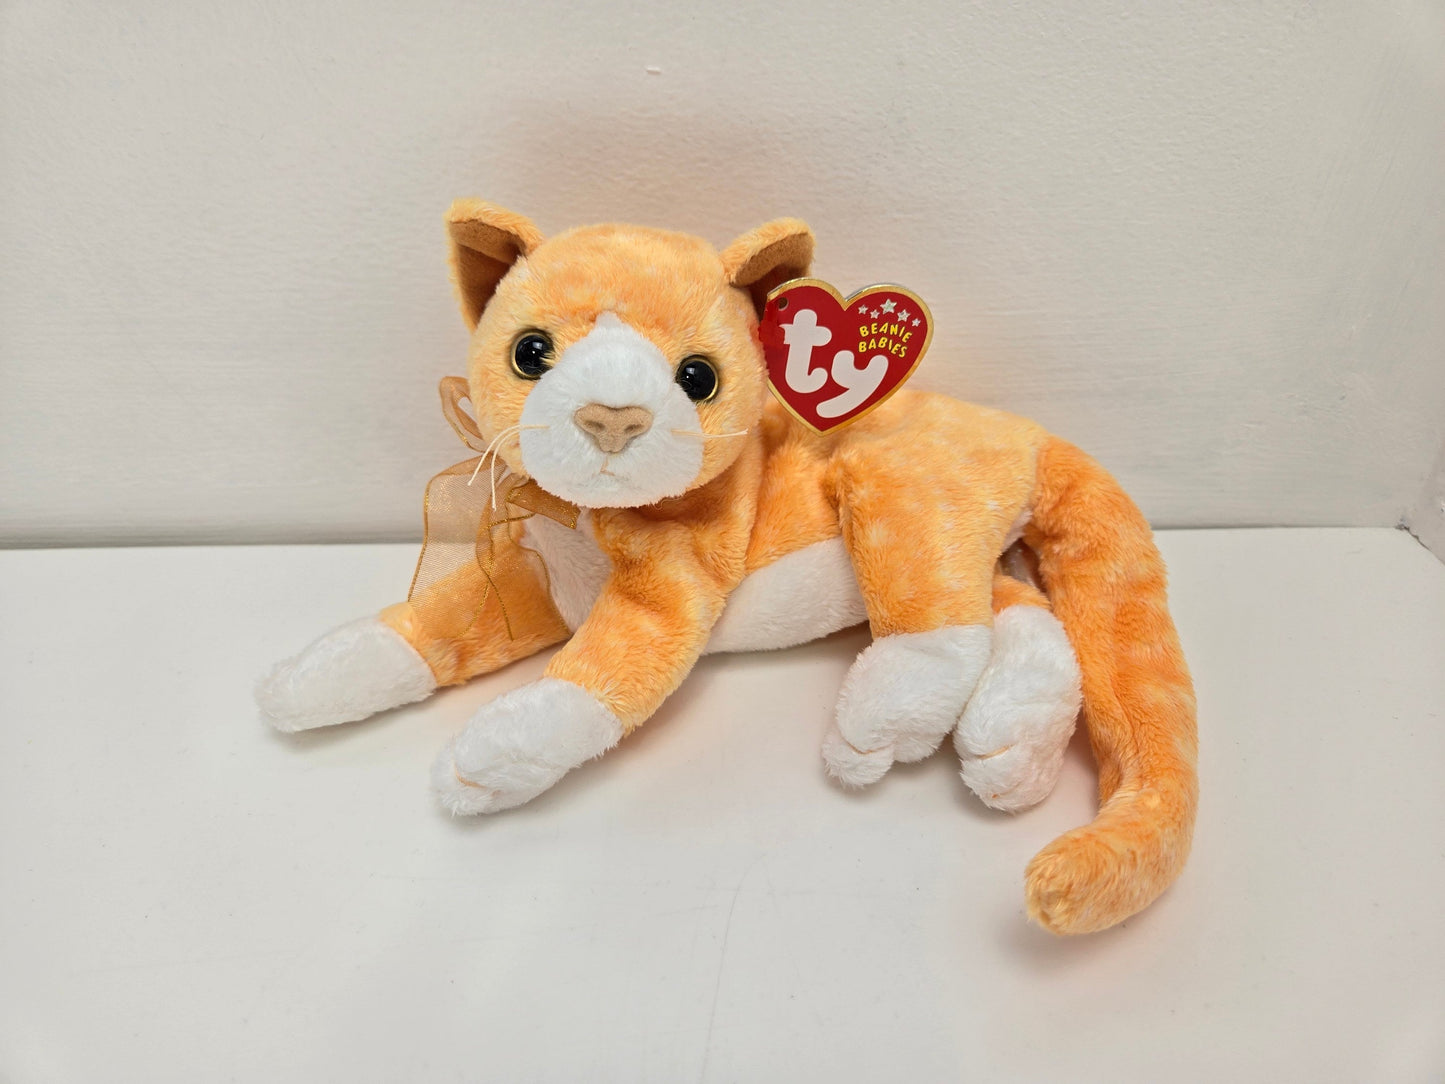 Ty Beanie Baby “Tabs” the Tabby Cat! (8 inch)